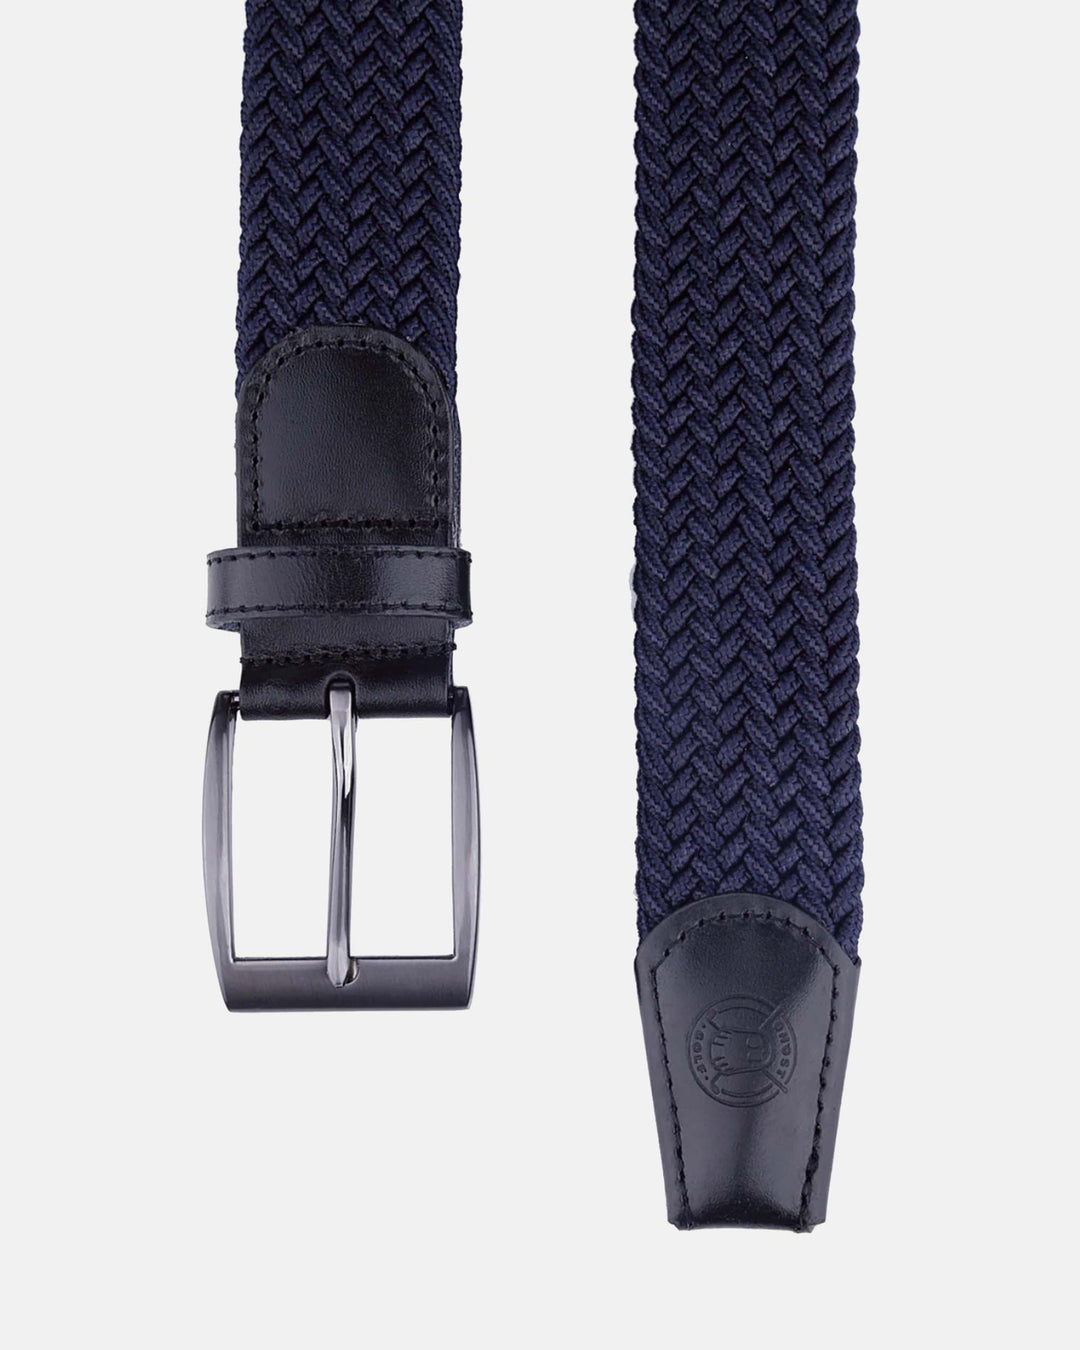 Ghost Golf Midnight Blue Belt with Black Buckle and Black PU Leather Tail